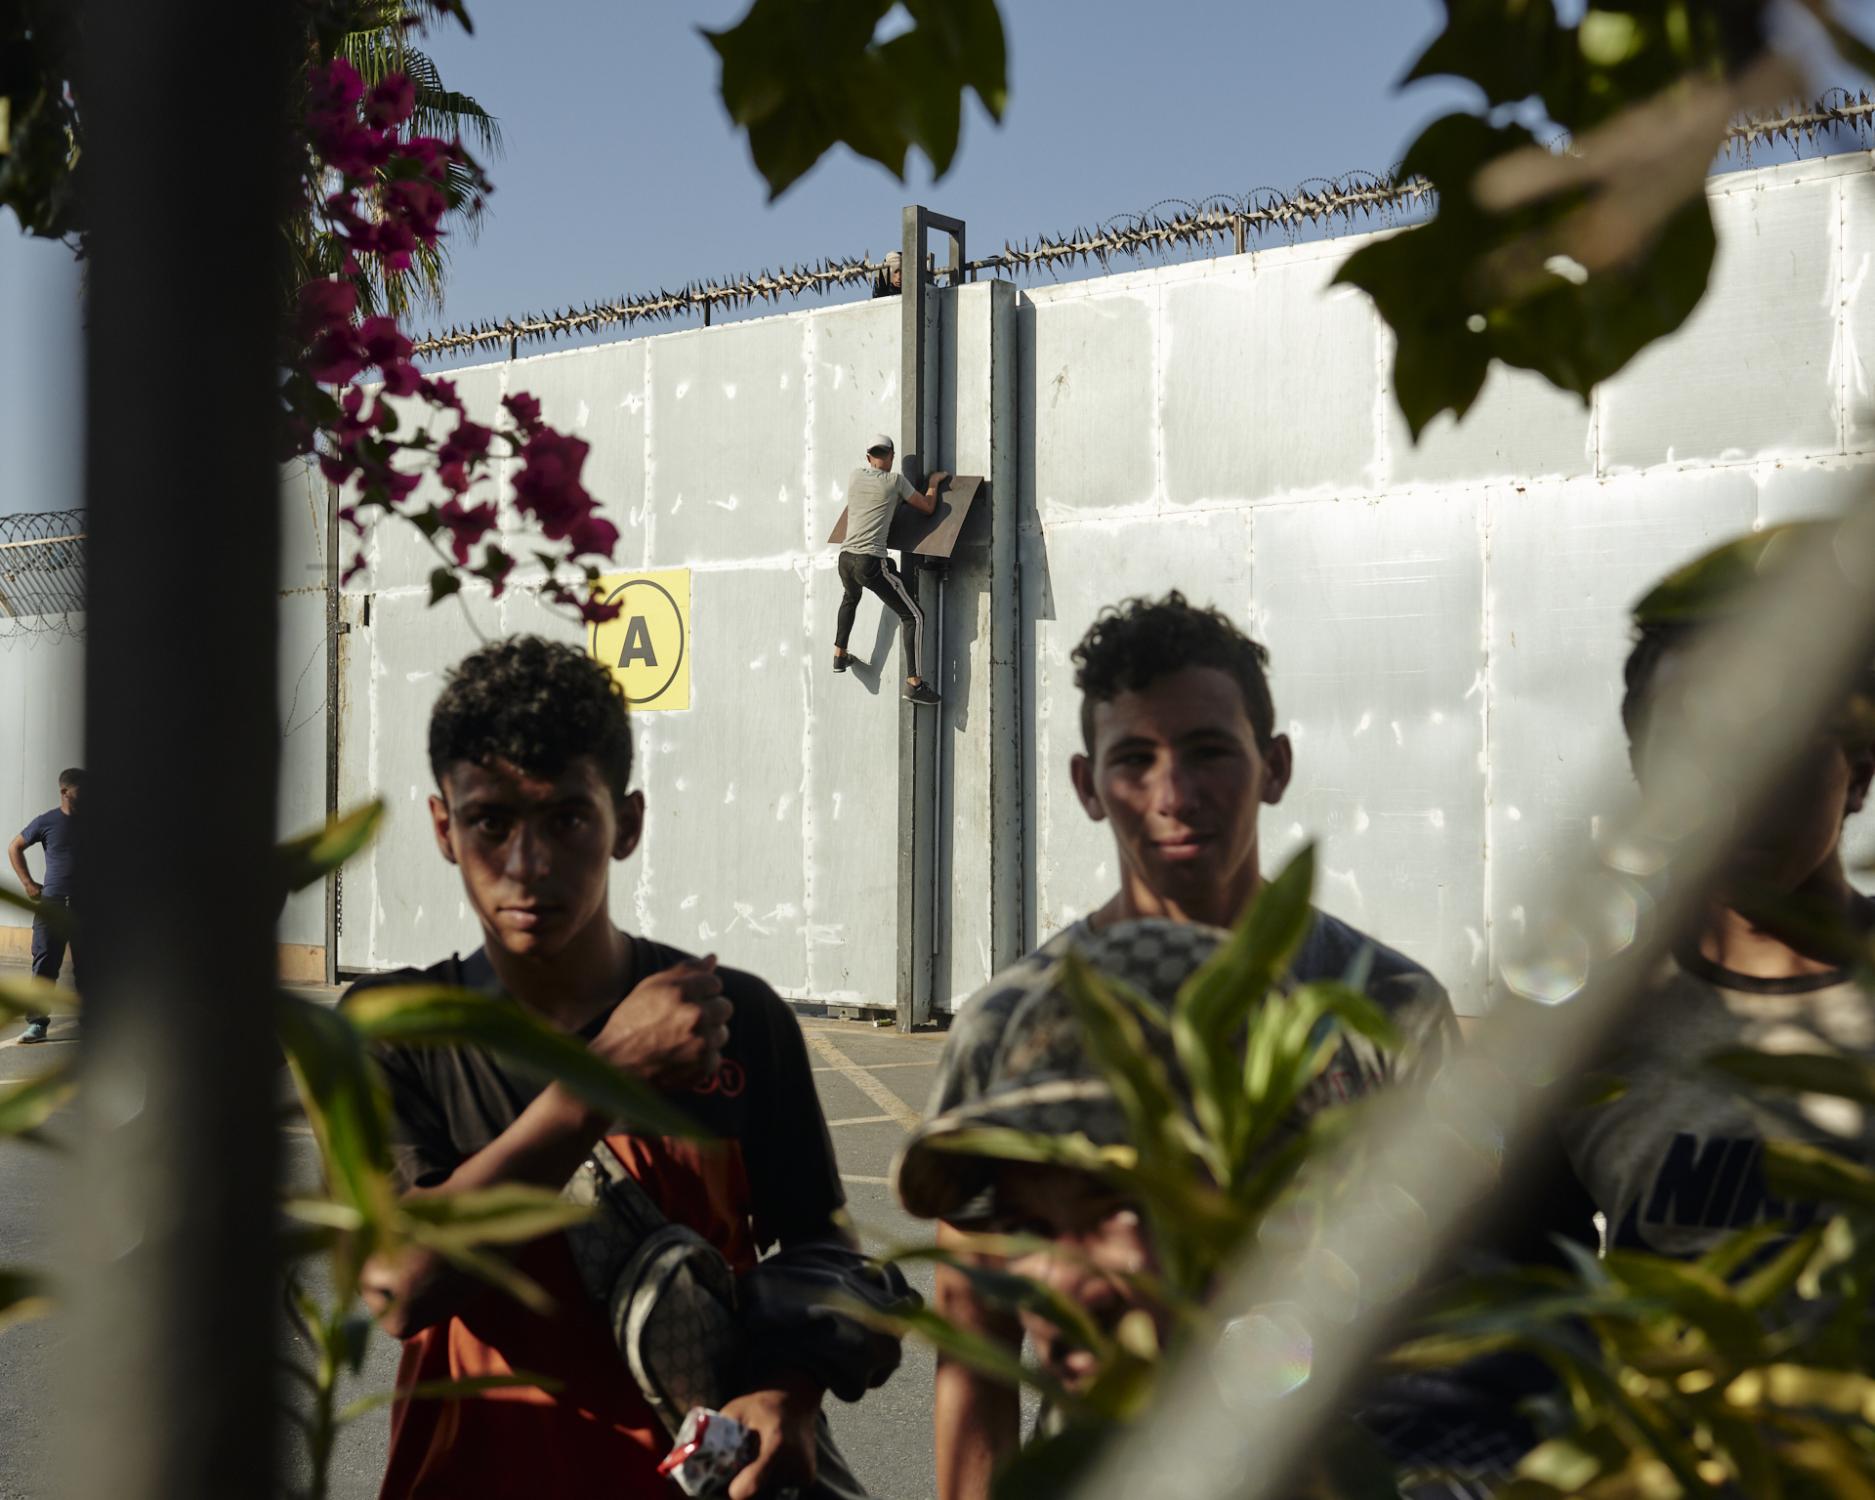 SALUT MAMAN: Crossing Morocco -   Once immigrants manage to trespass into Ceuta, the next...